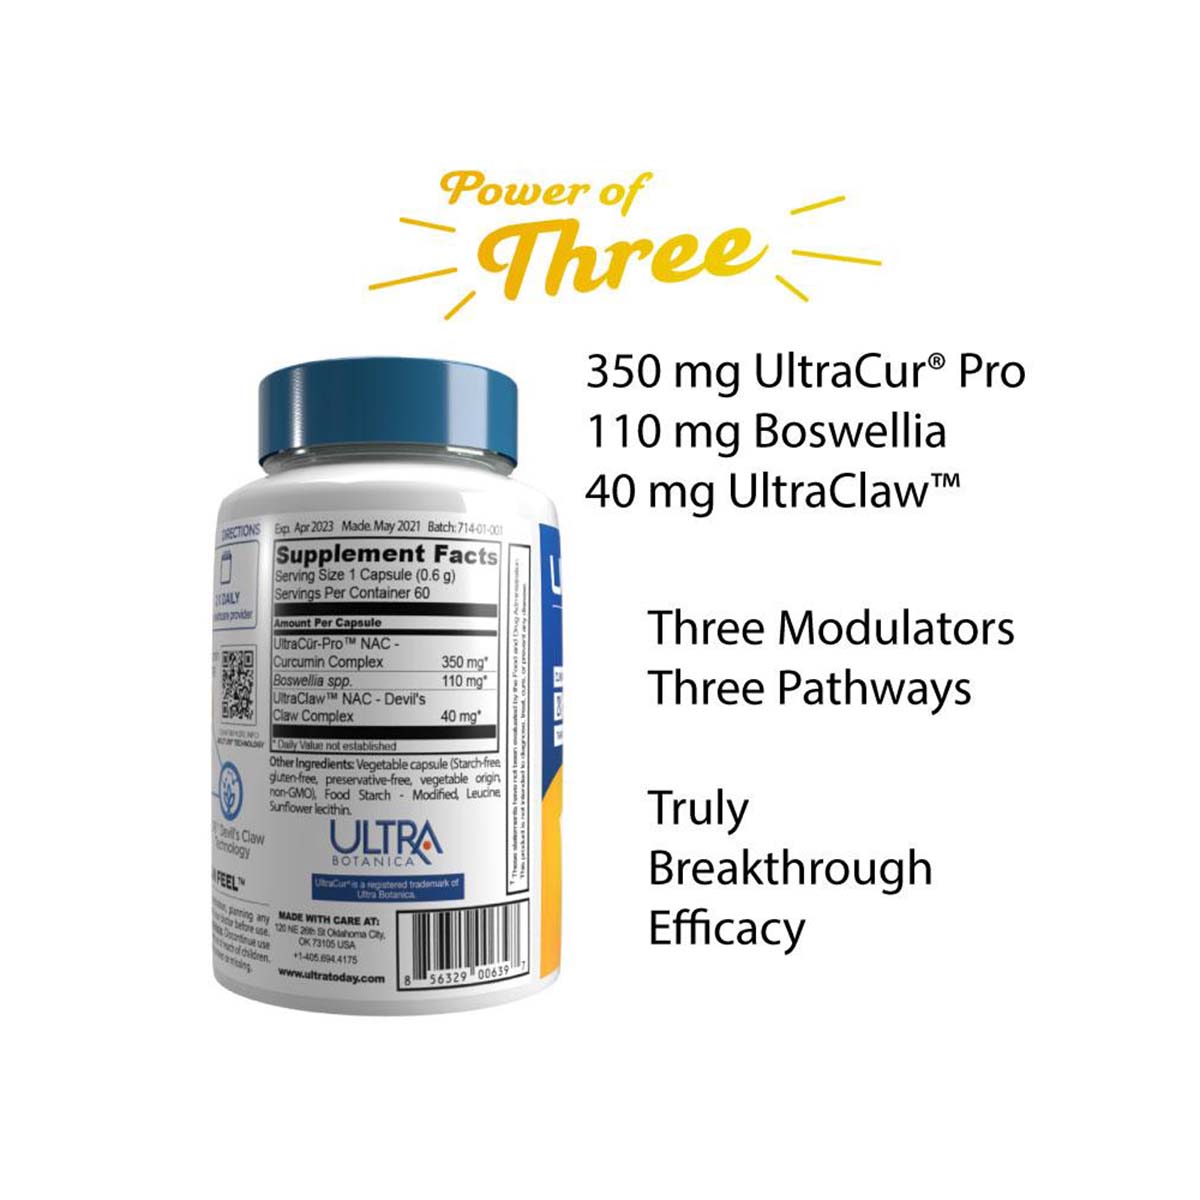 ULTRACUR Advanced Power of Three